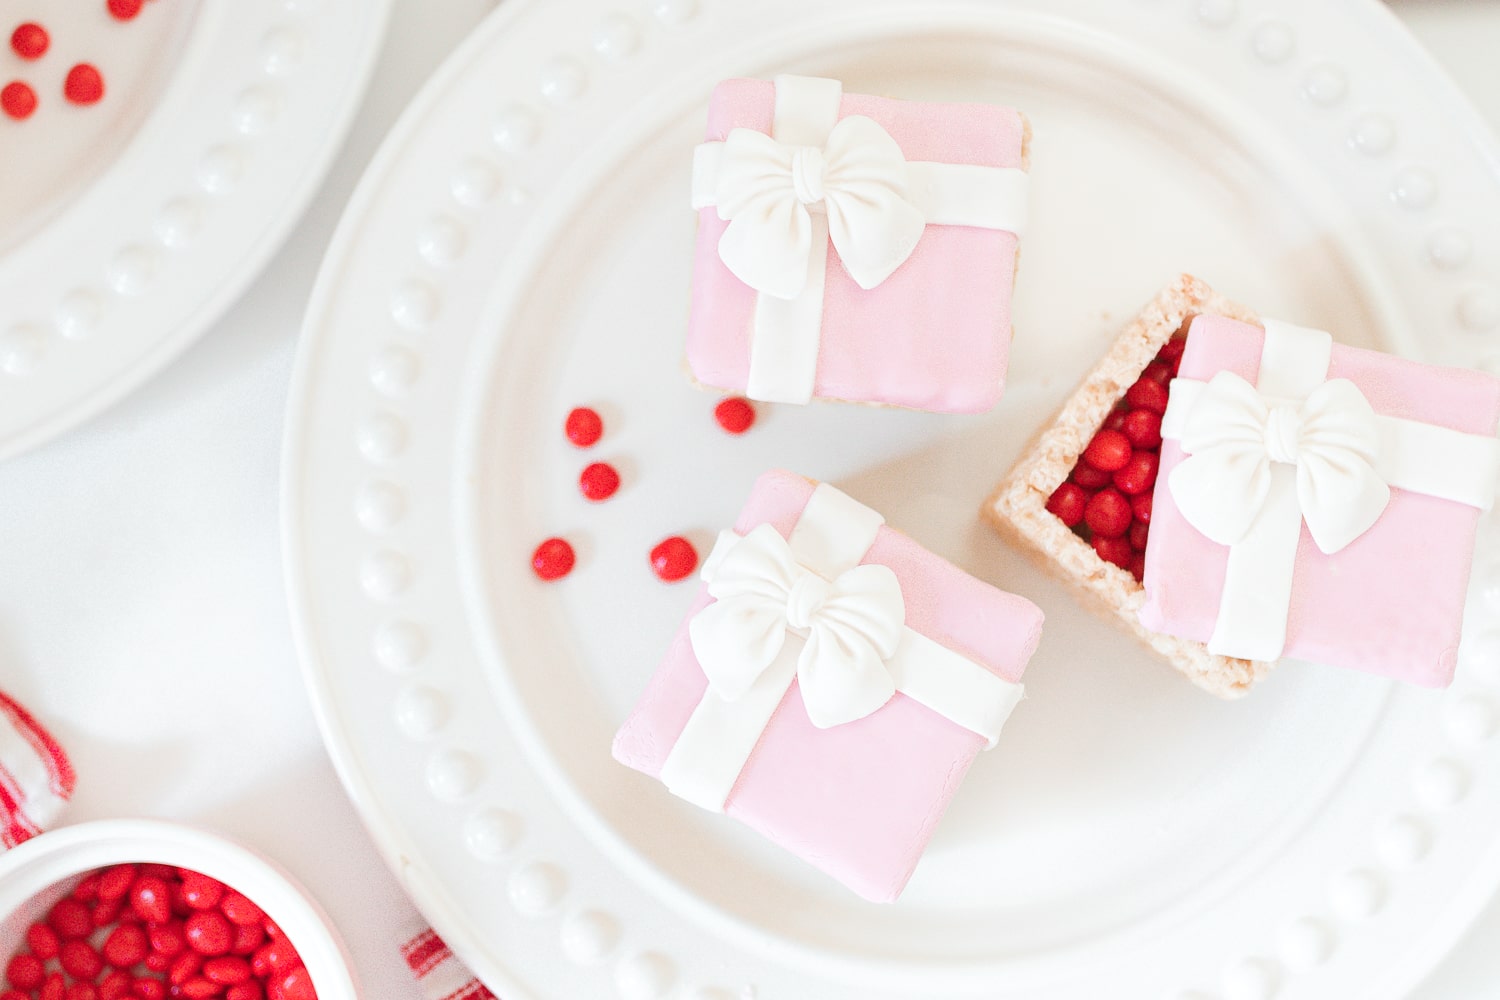 Edible gift boxes made out of rice krispie treats and fondant by southern lifestyle blogger Stephanie Ziajka on Diary of a Debutante